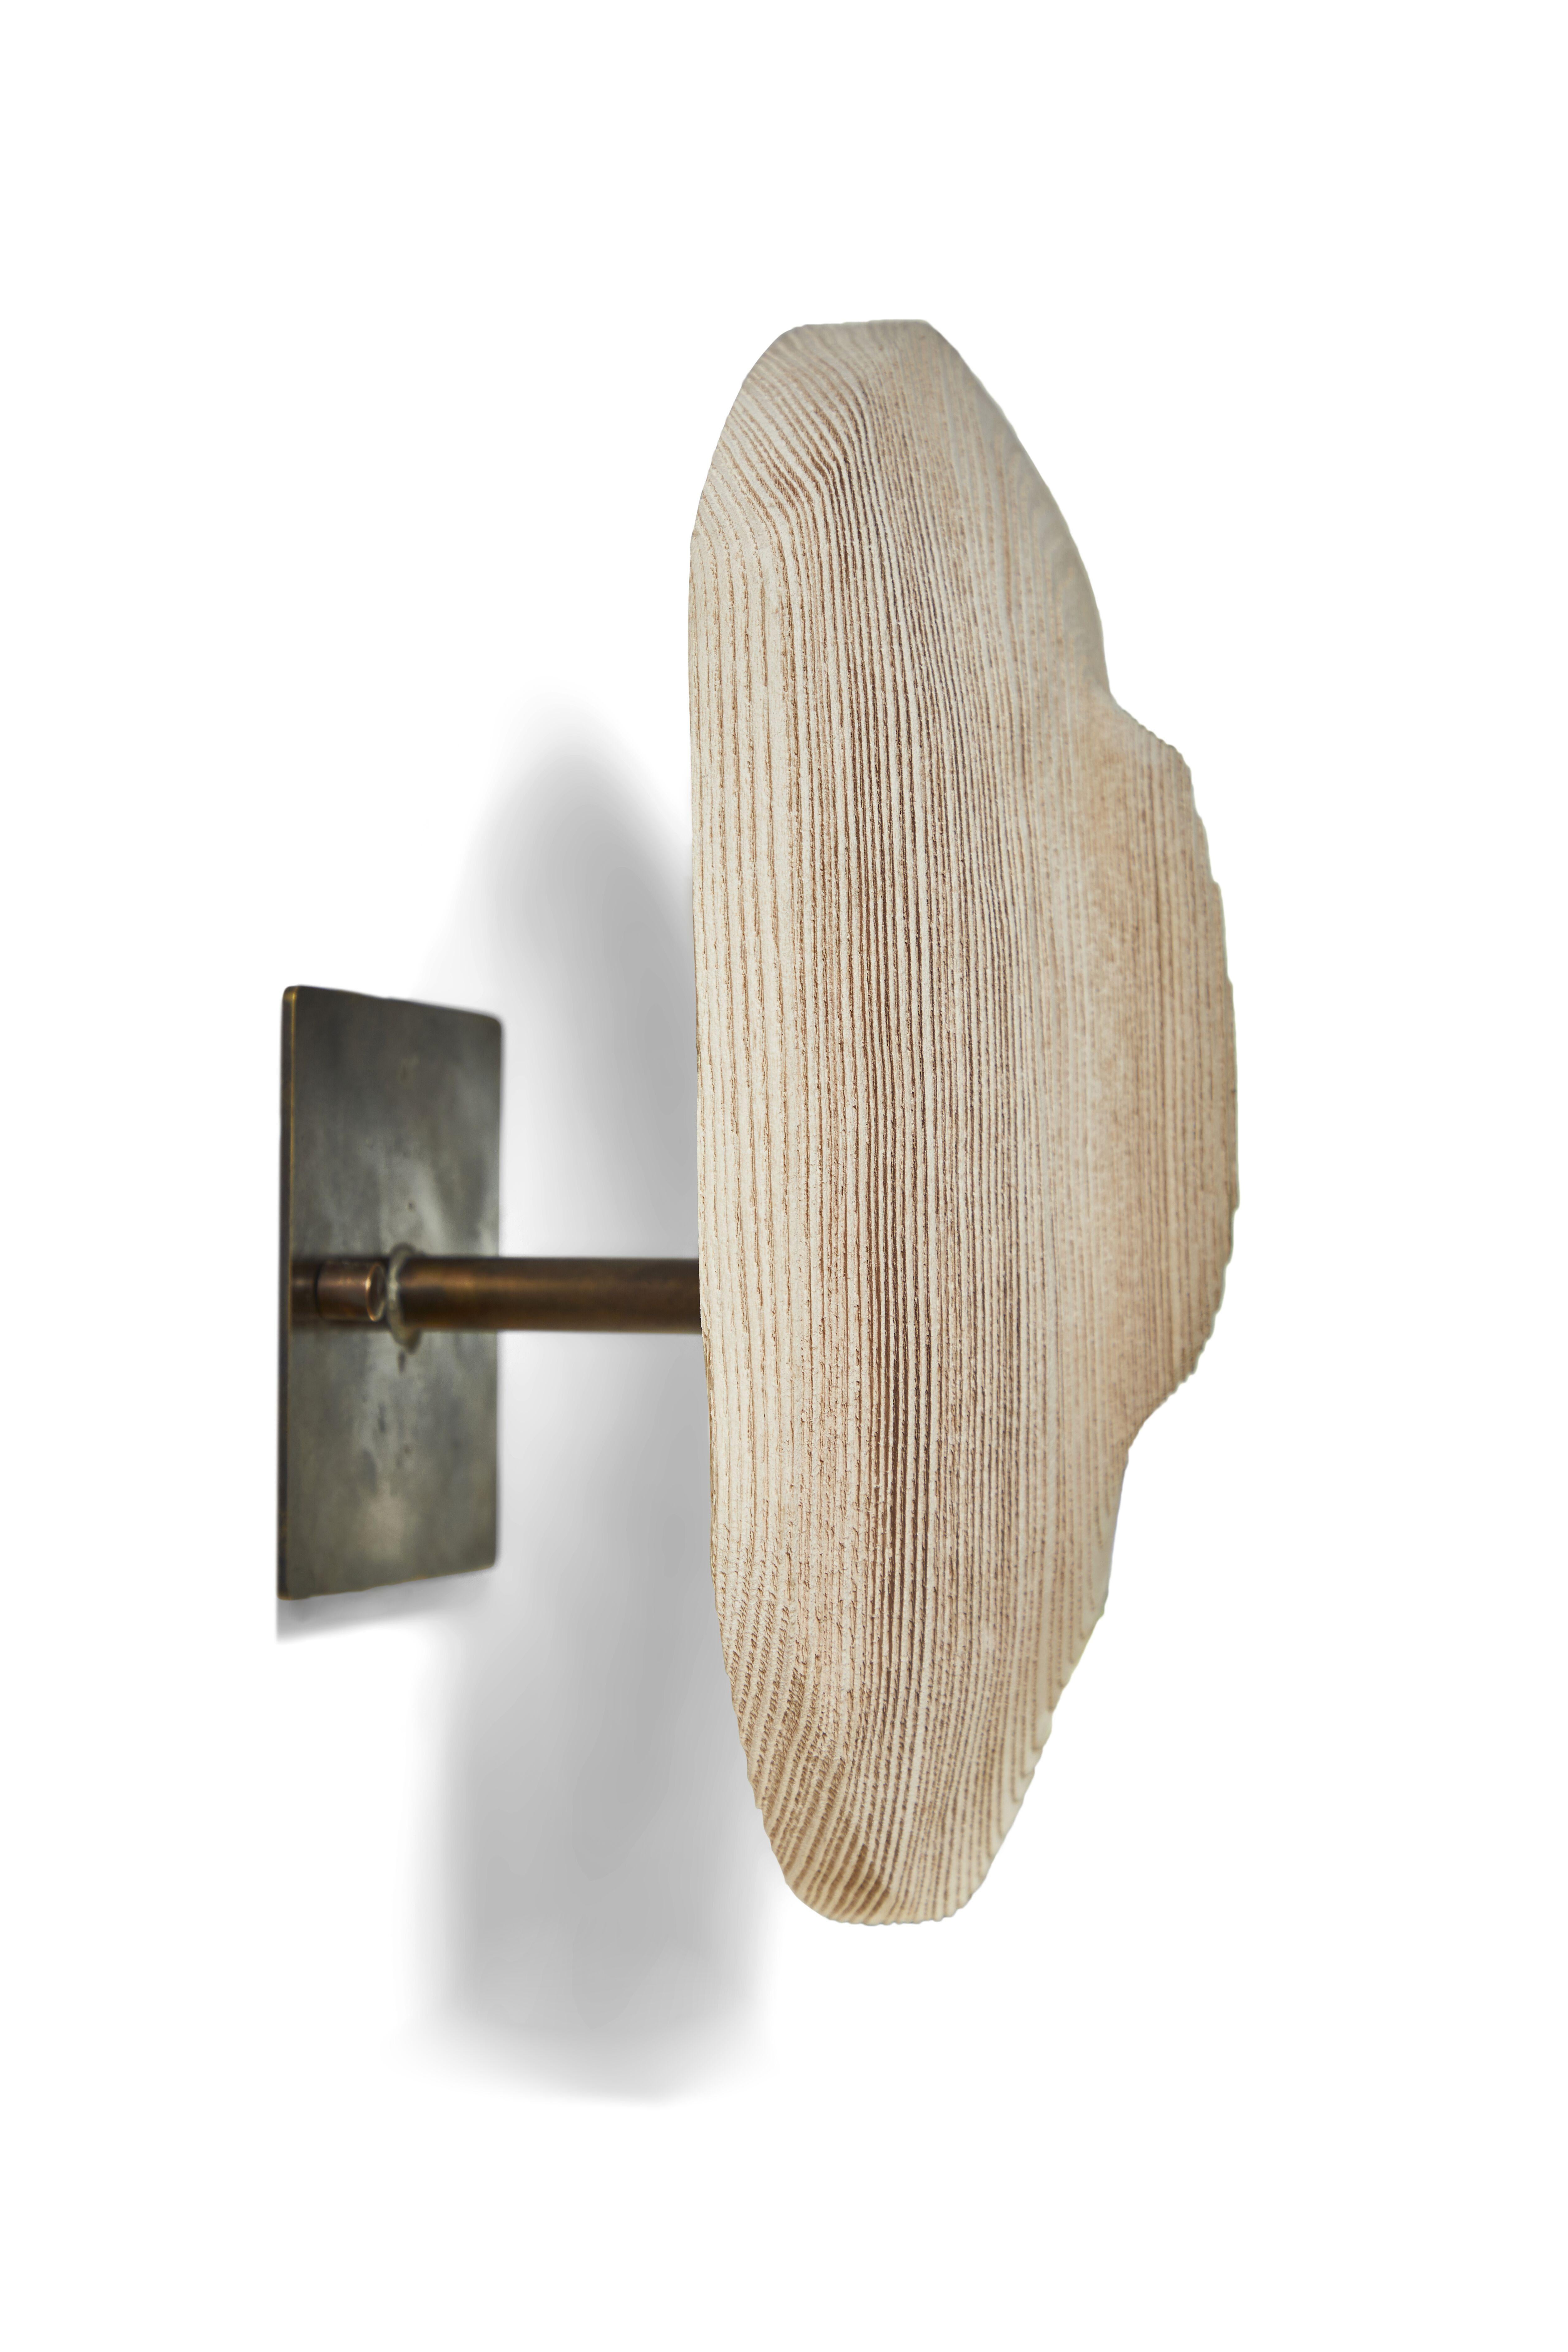 American Sculptural Organic Hand Carved Sandblasted Ash Sconce by Casey McCafferty For Sale